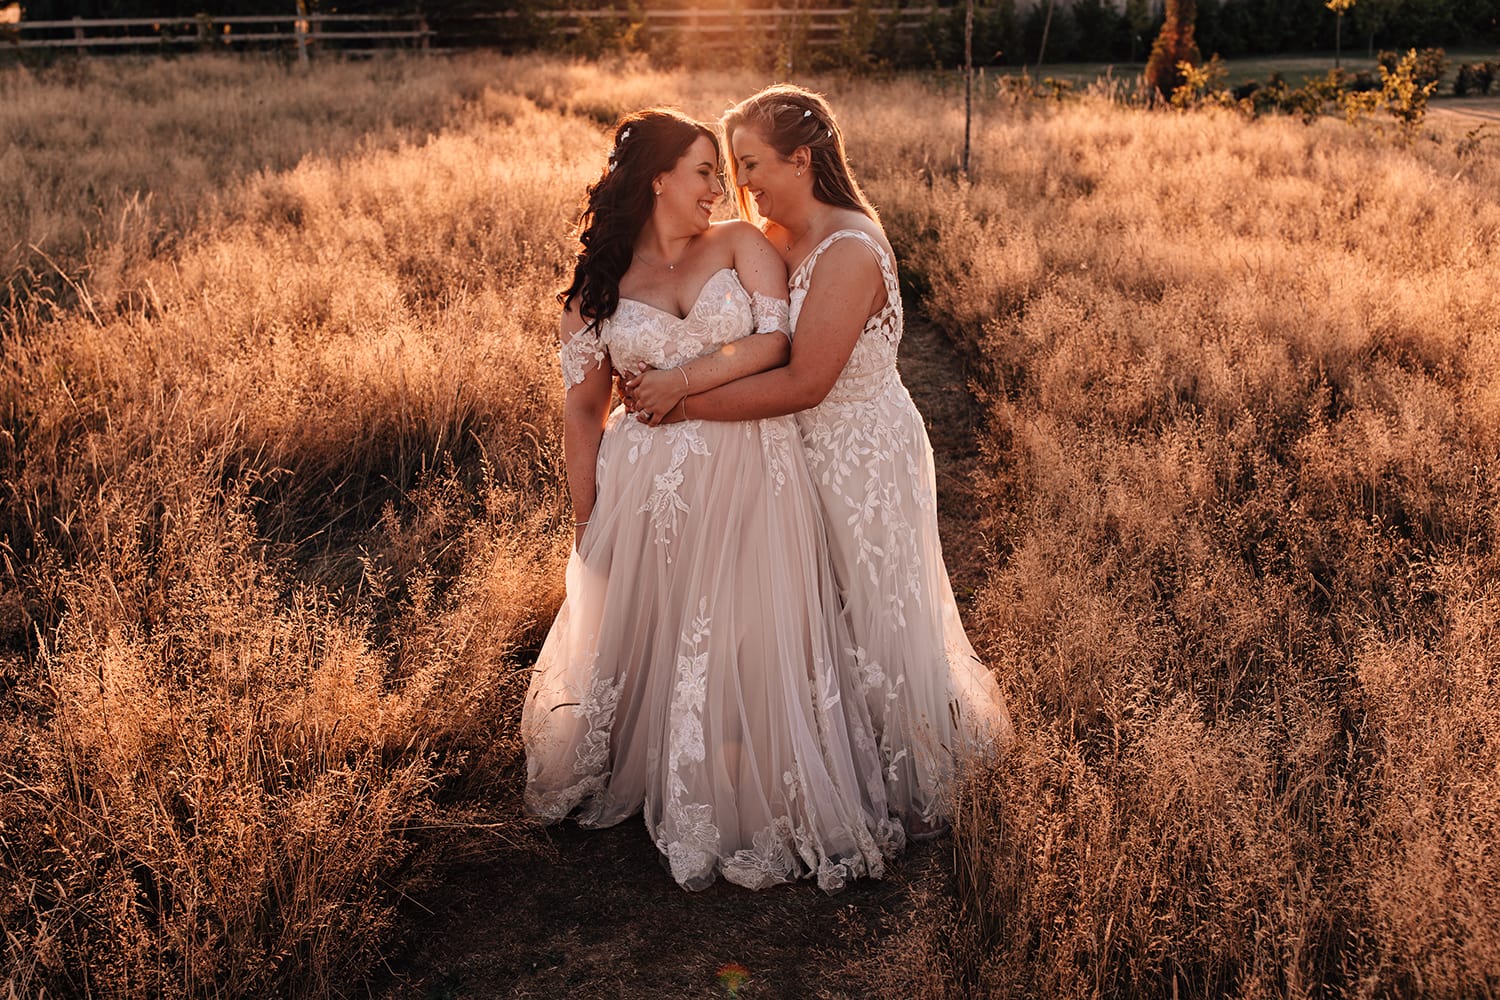 Two brides embracing in a golden, sunset lit field